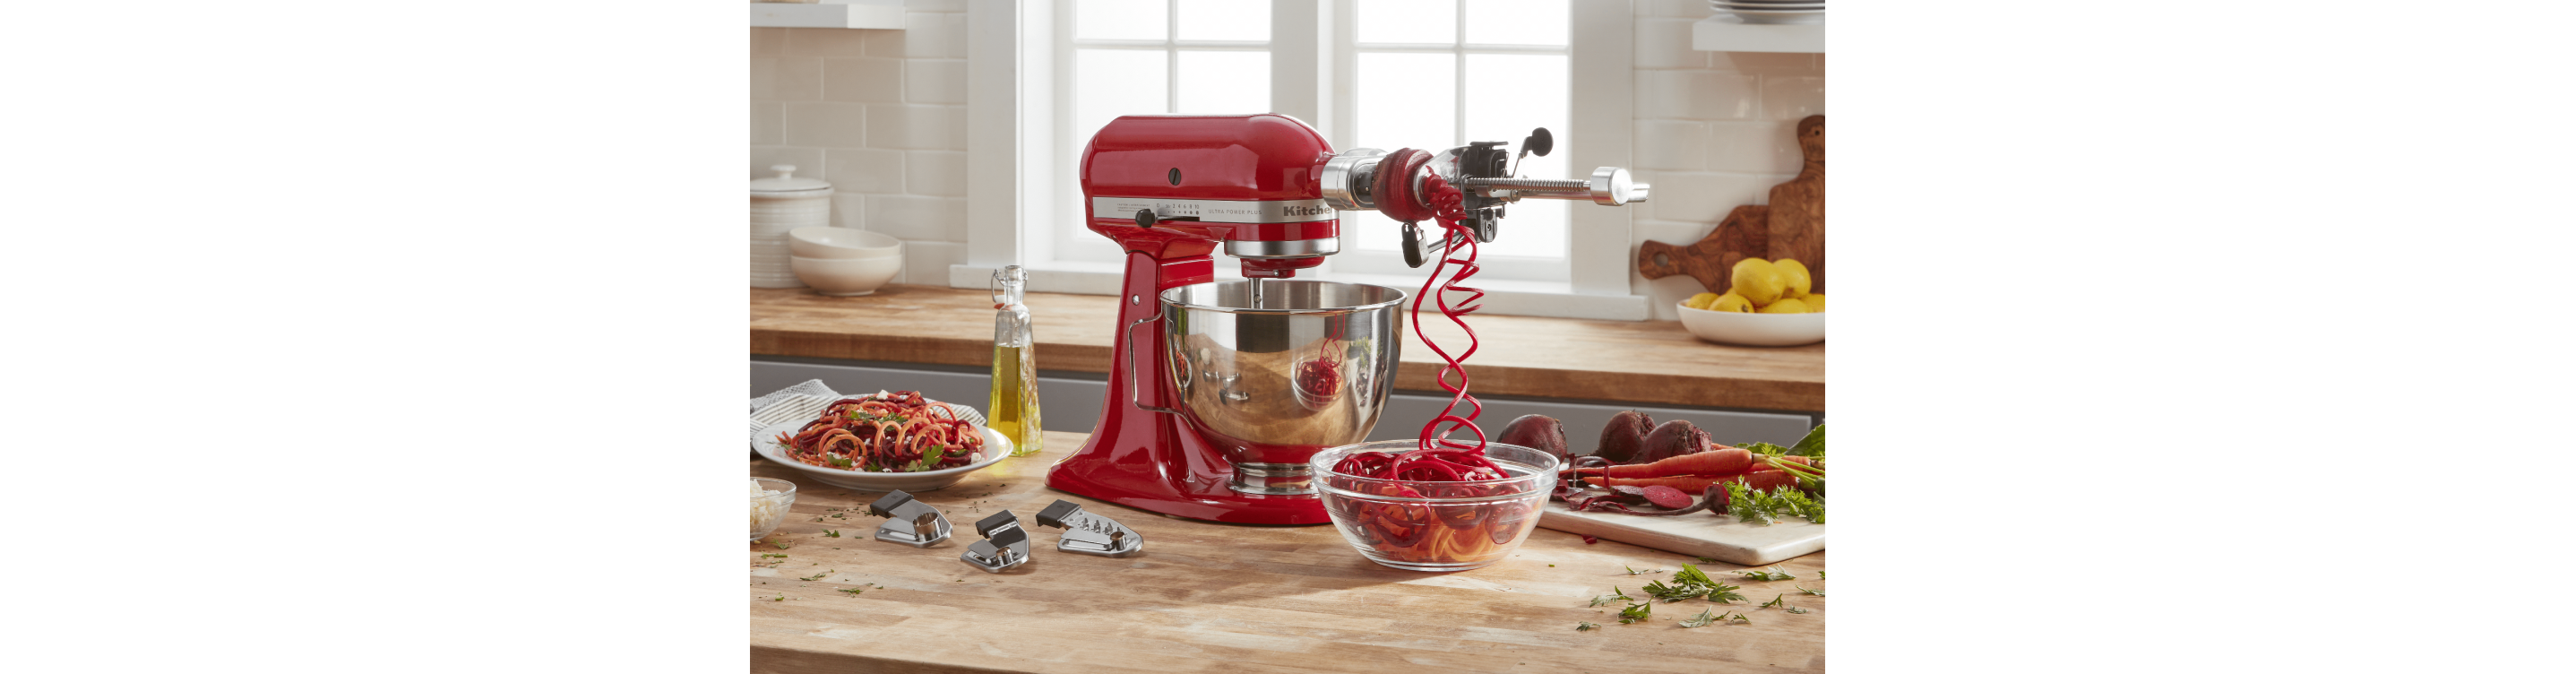 KitchenAid® Bowl-Lift Stand Mixer Collection: How to Use 